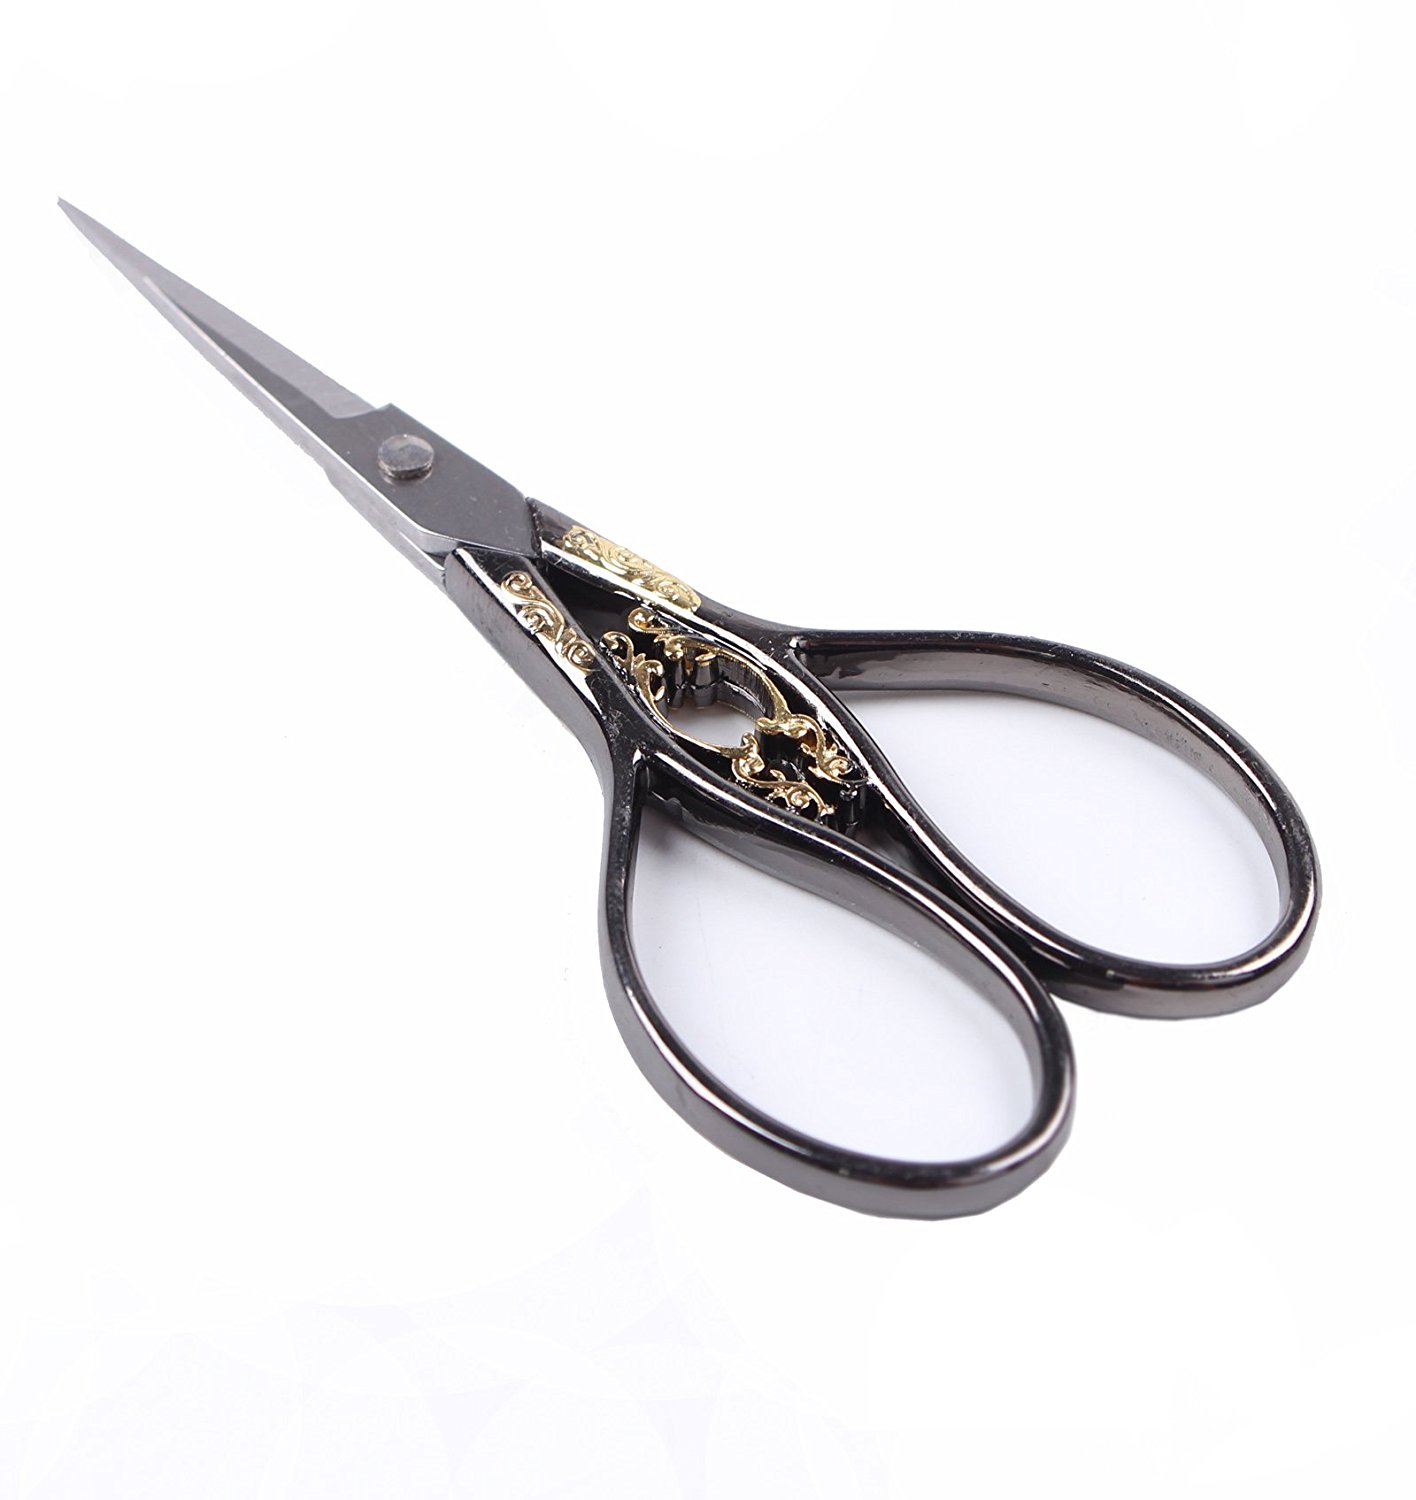 11 Essential Crochet Tools Cute Vintage Style Embroidery Scissors